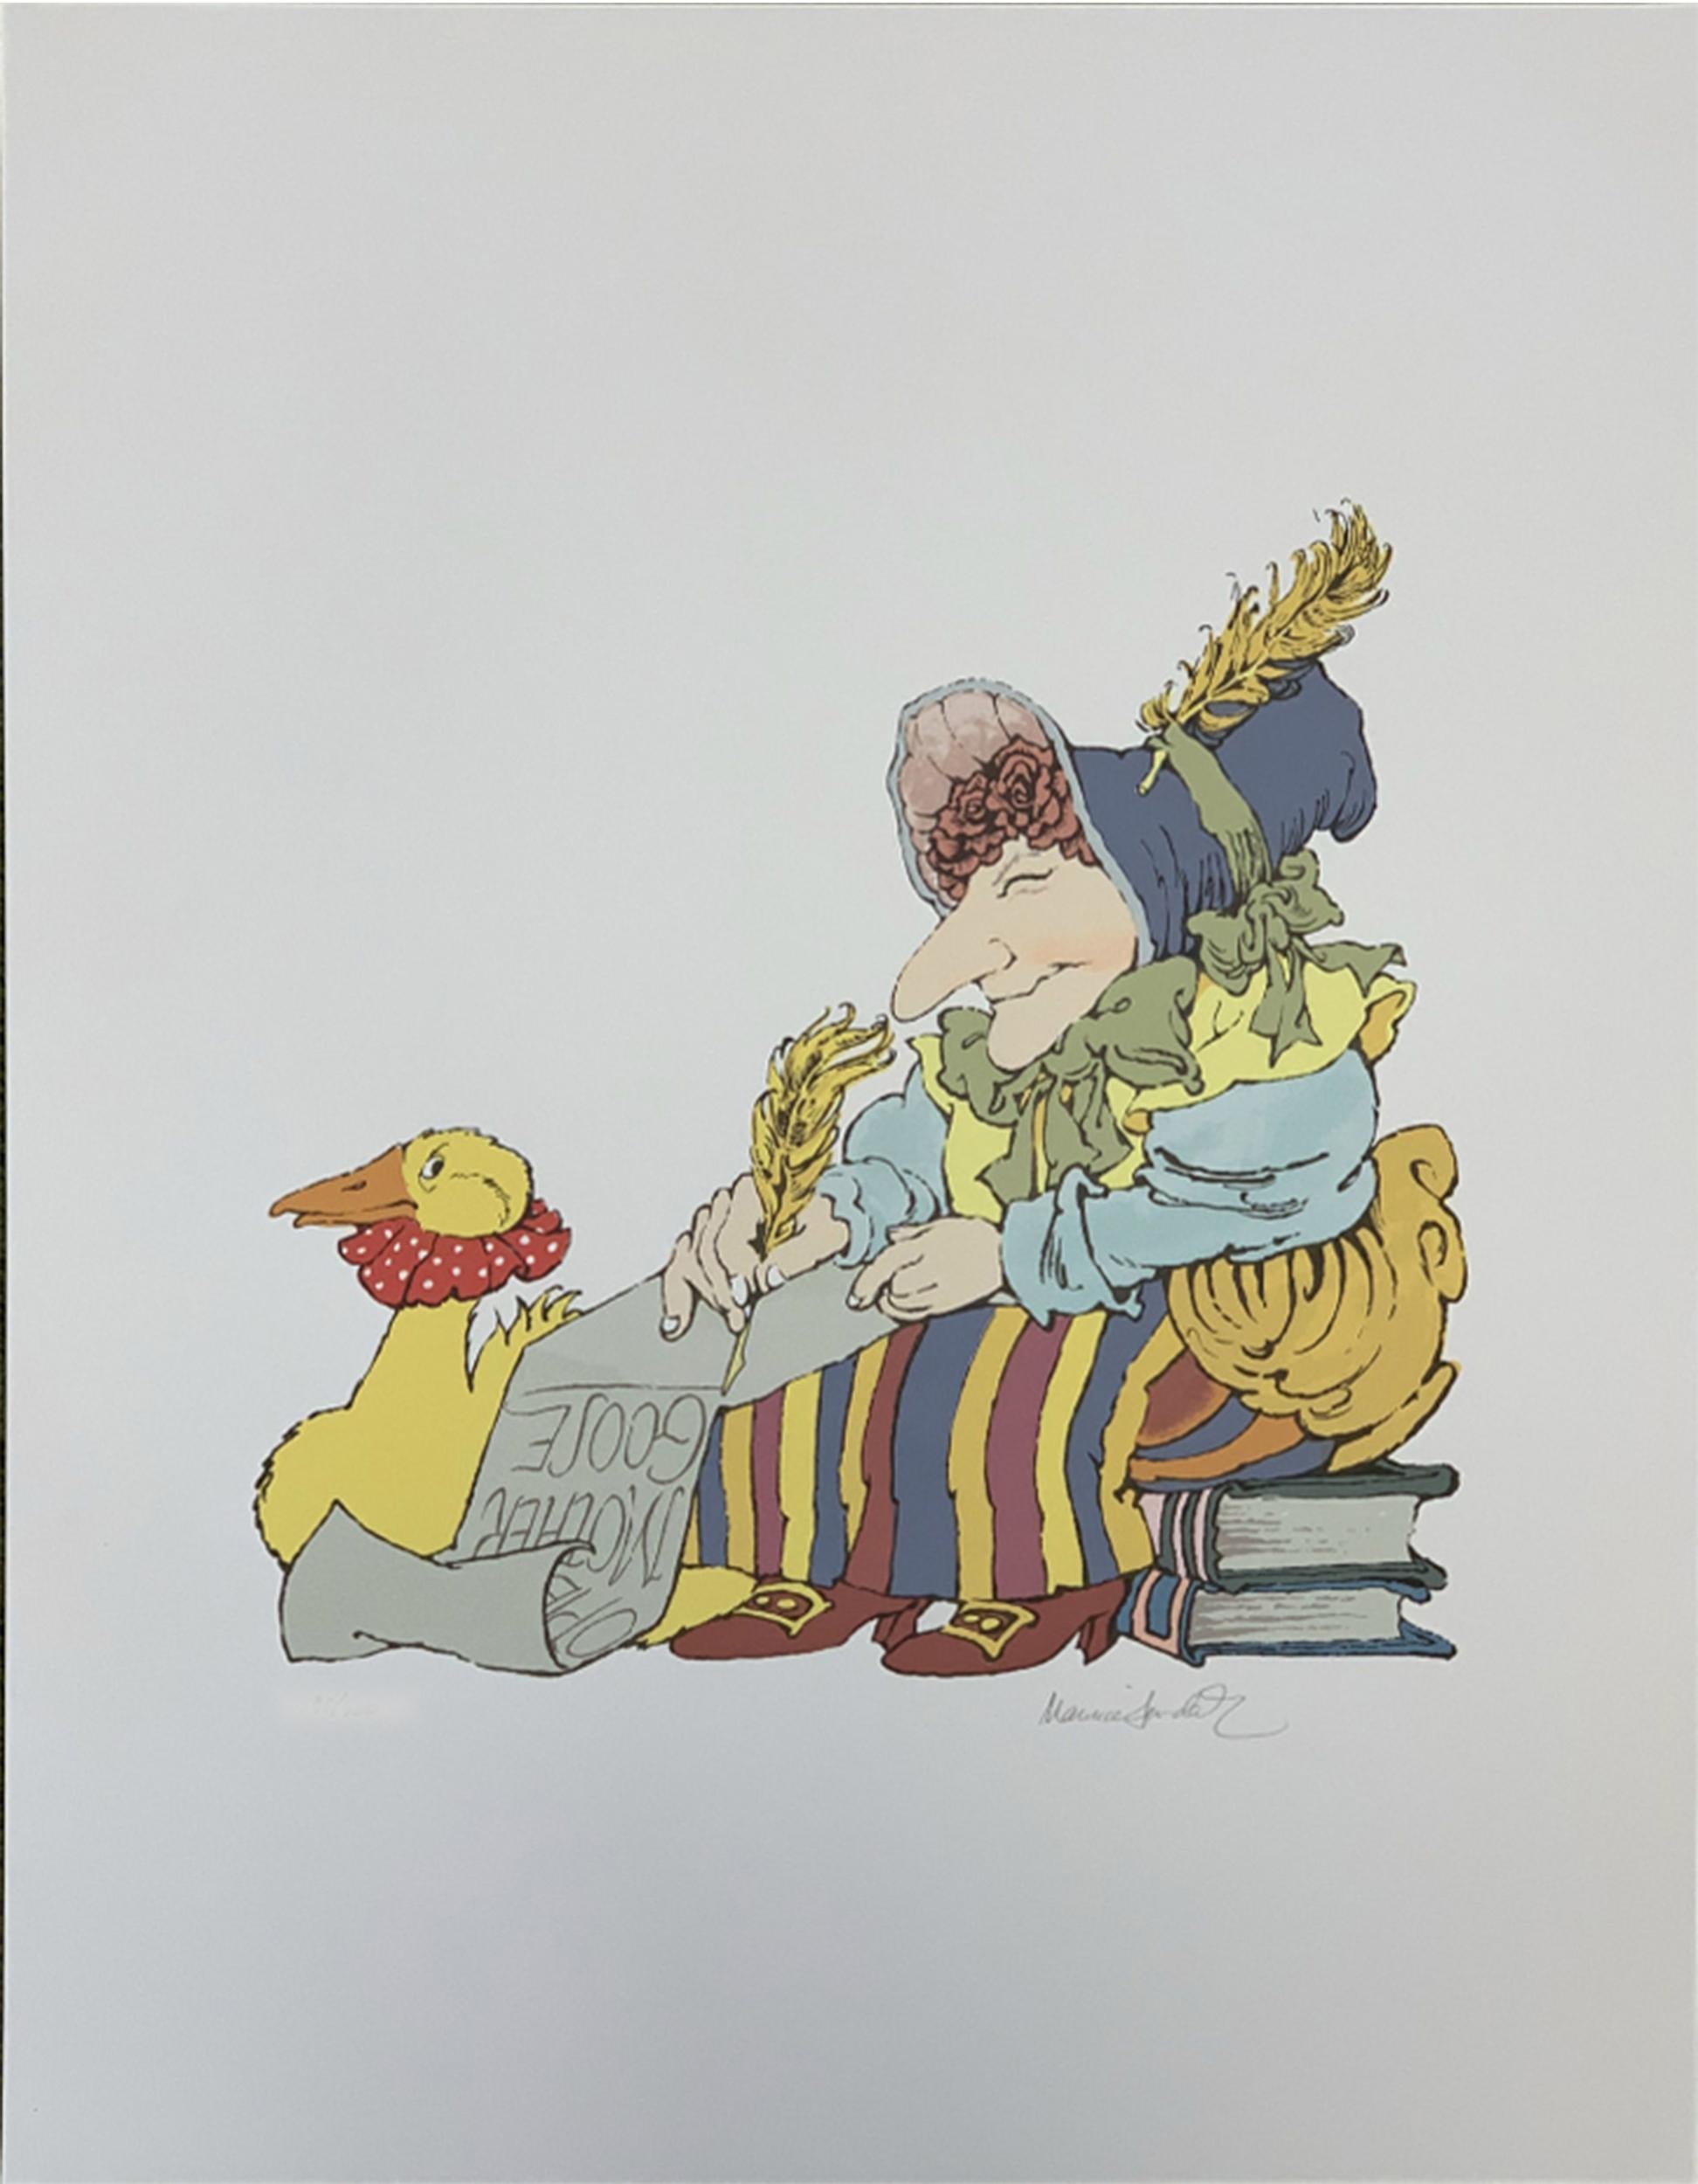 A traditional children's illustration-style print of Mother Goose, sitting on a stack of books and writing down stories on a scroll. She is elaborately dressed in striped trousers, a yellow shirt, and a blue bonnet, adorned everywhere with green